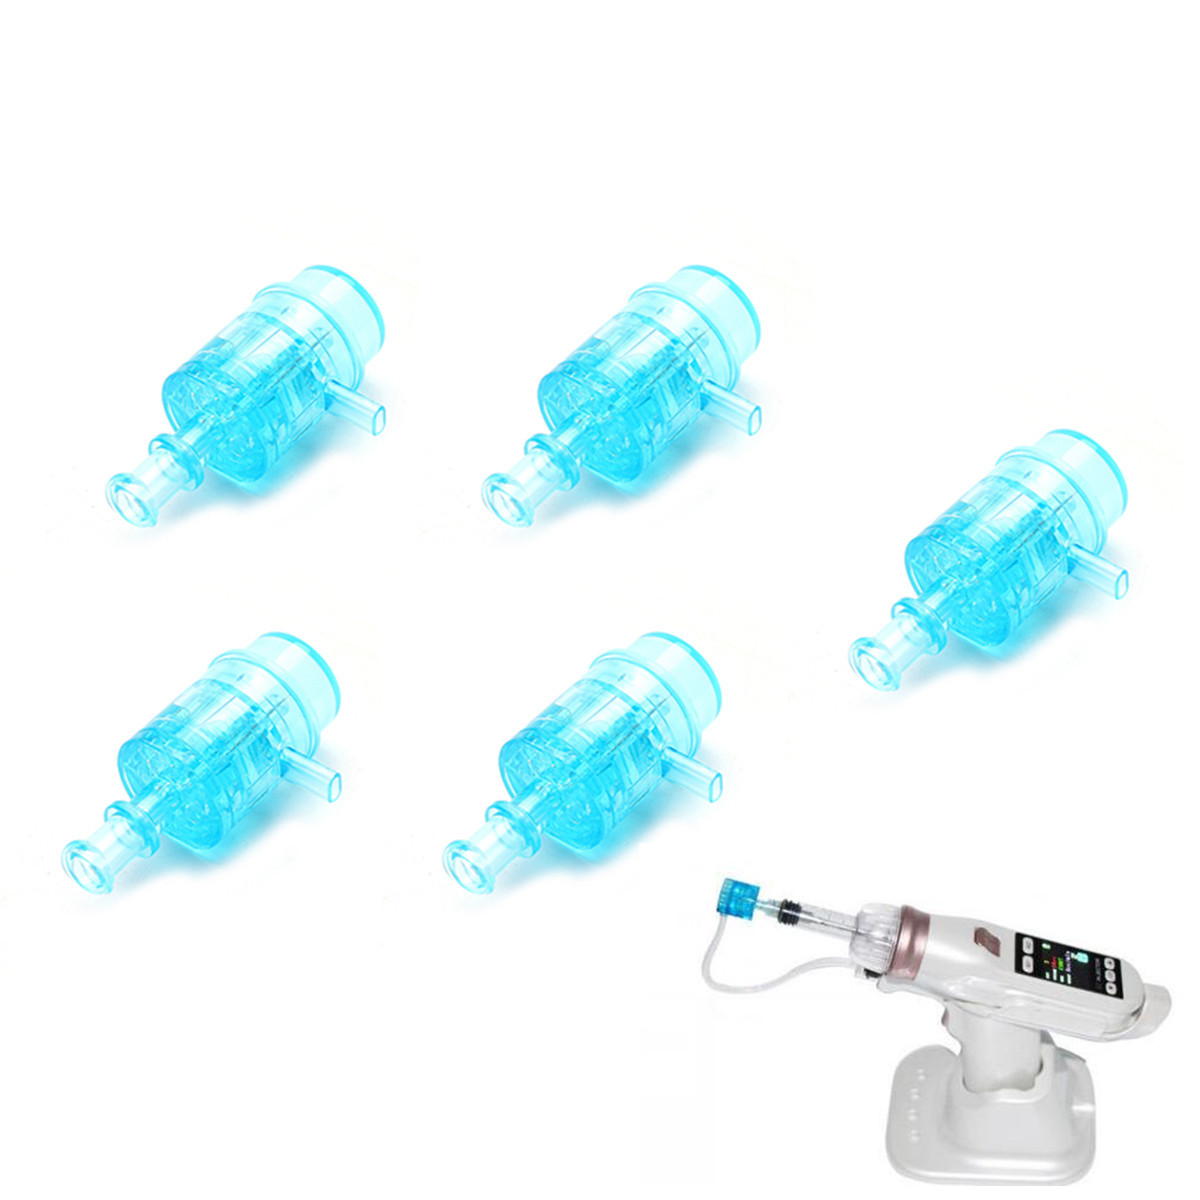 5pcs Needles Tip for Vacuum Mesotherapy Injector